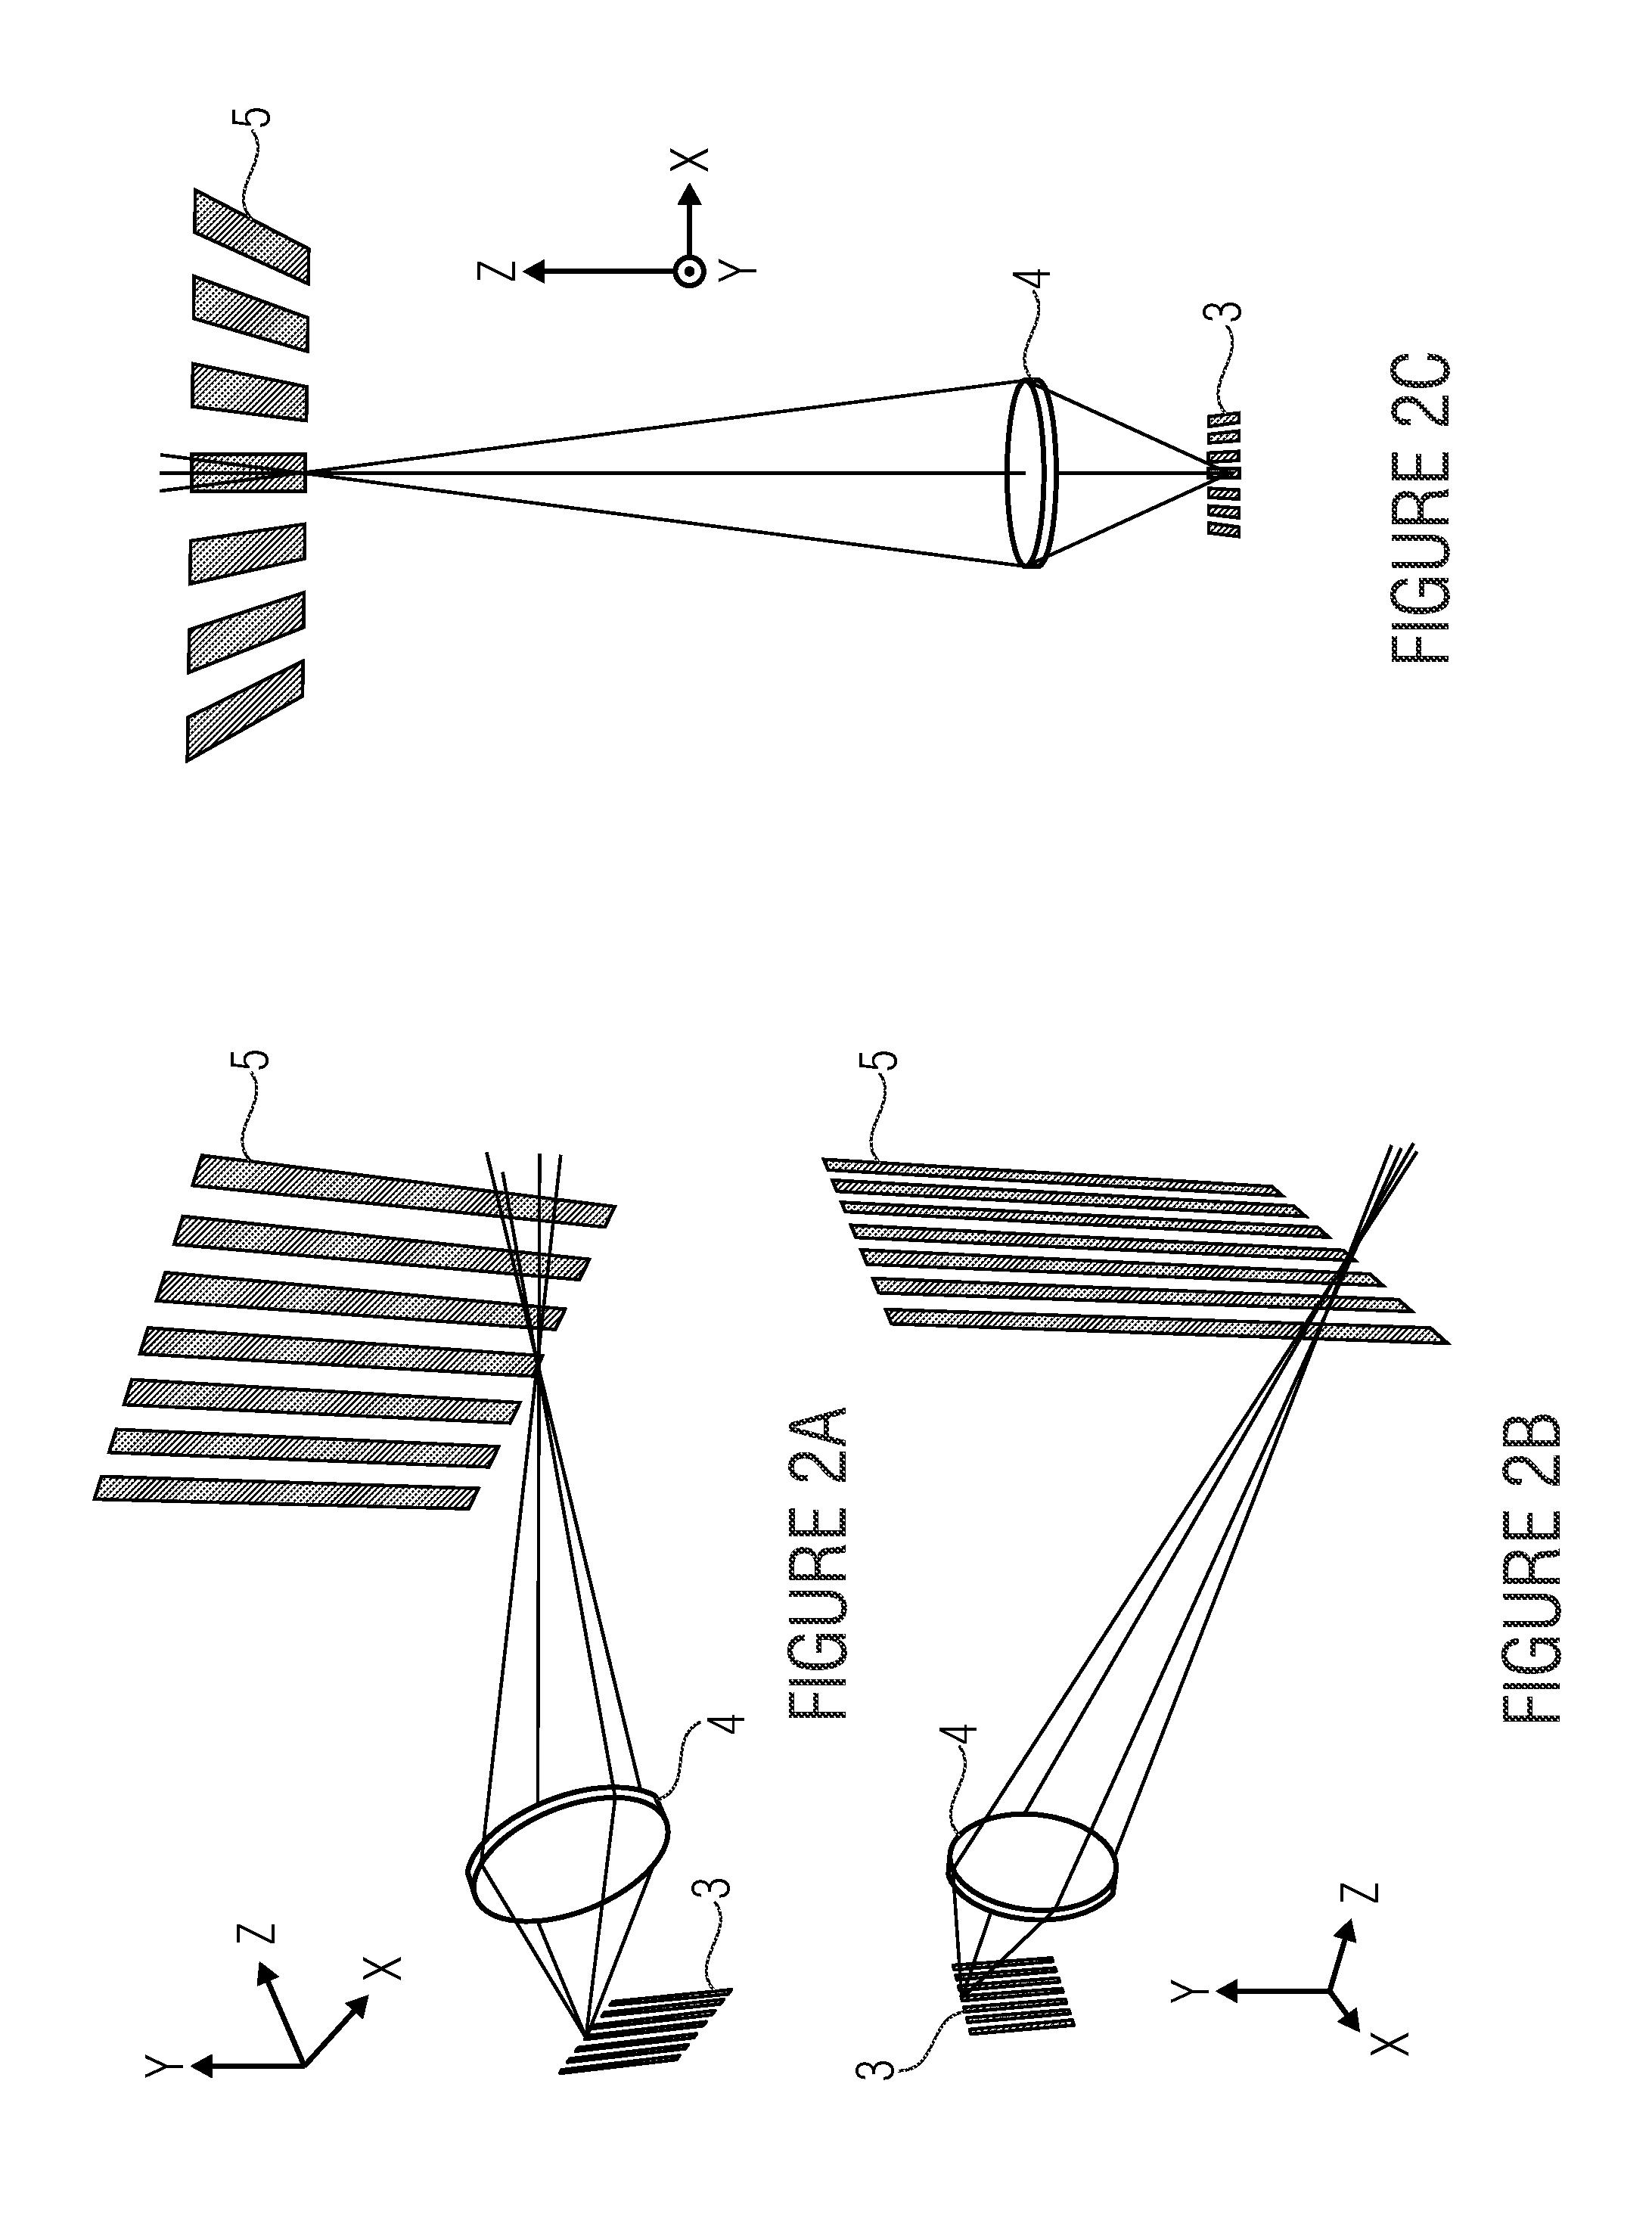 Projection display with multi-channel optics with non-circular overall aperture